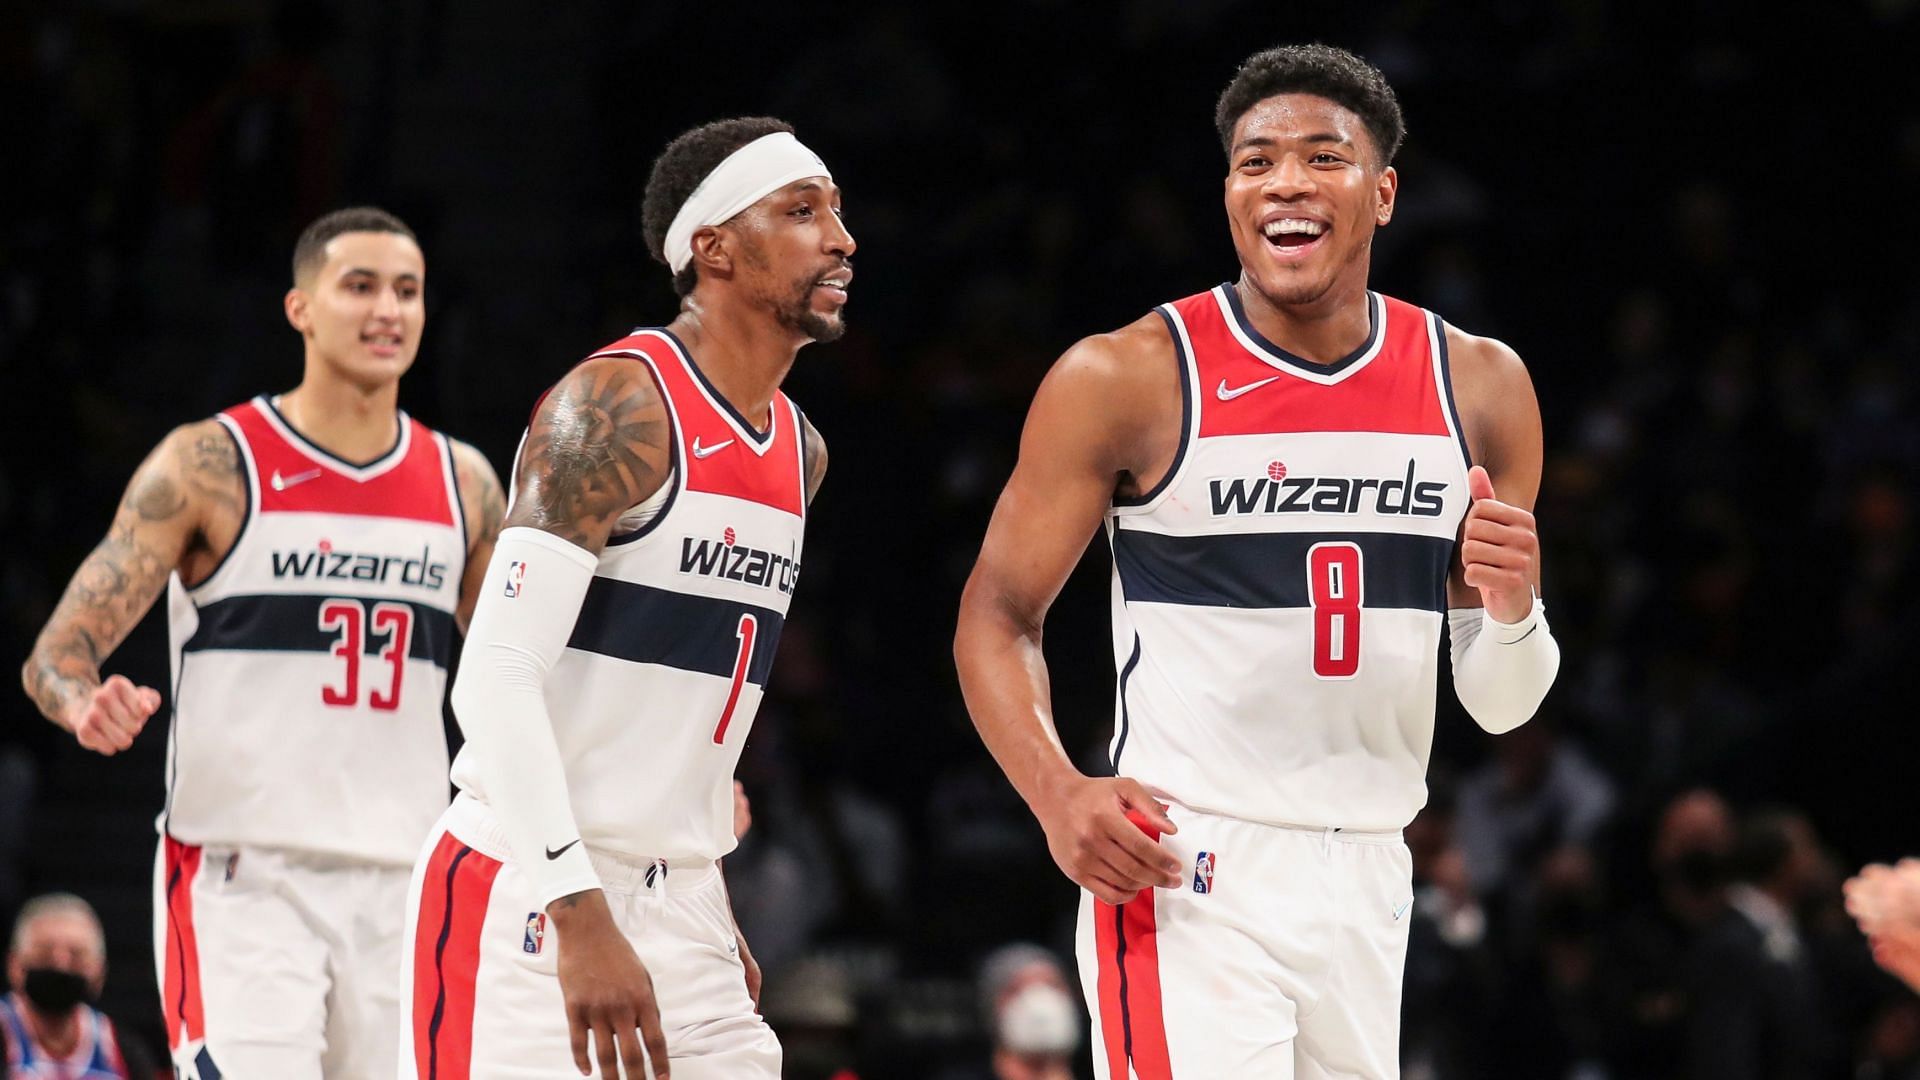 The Washington Wizards are facing uncertainties this summer. [Photo: NBC Sports]